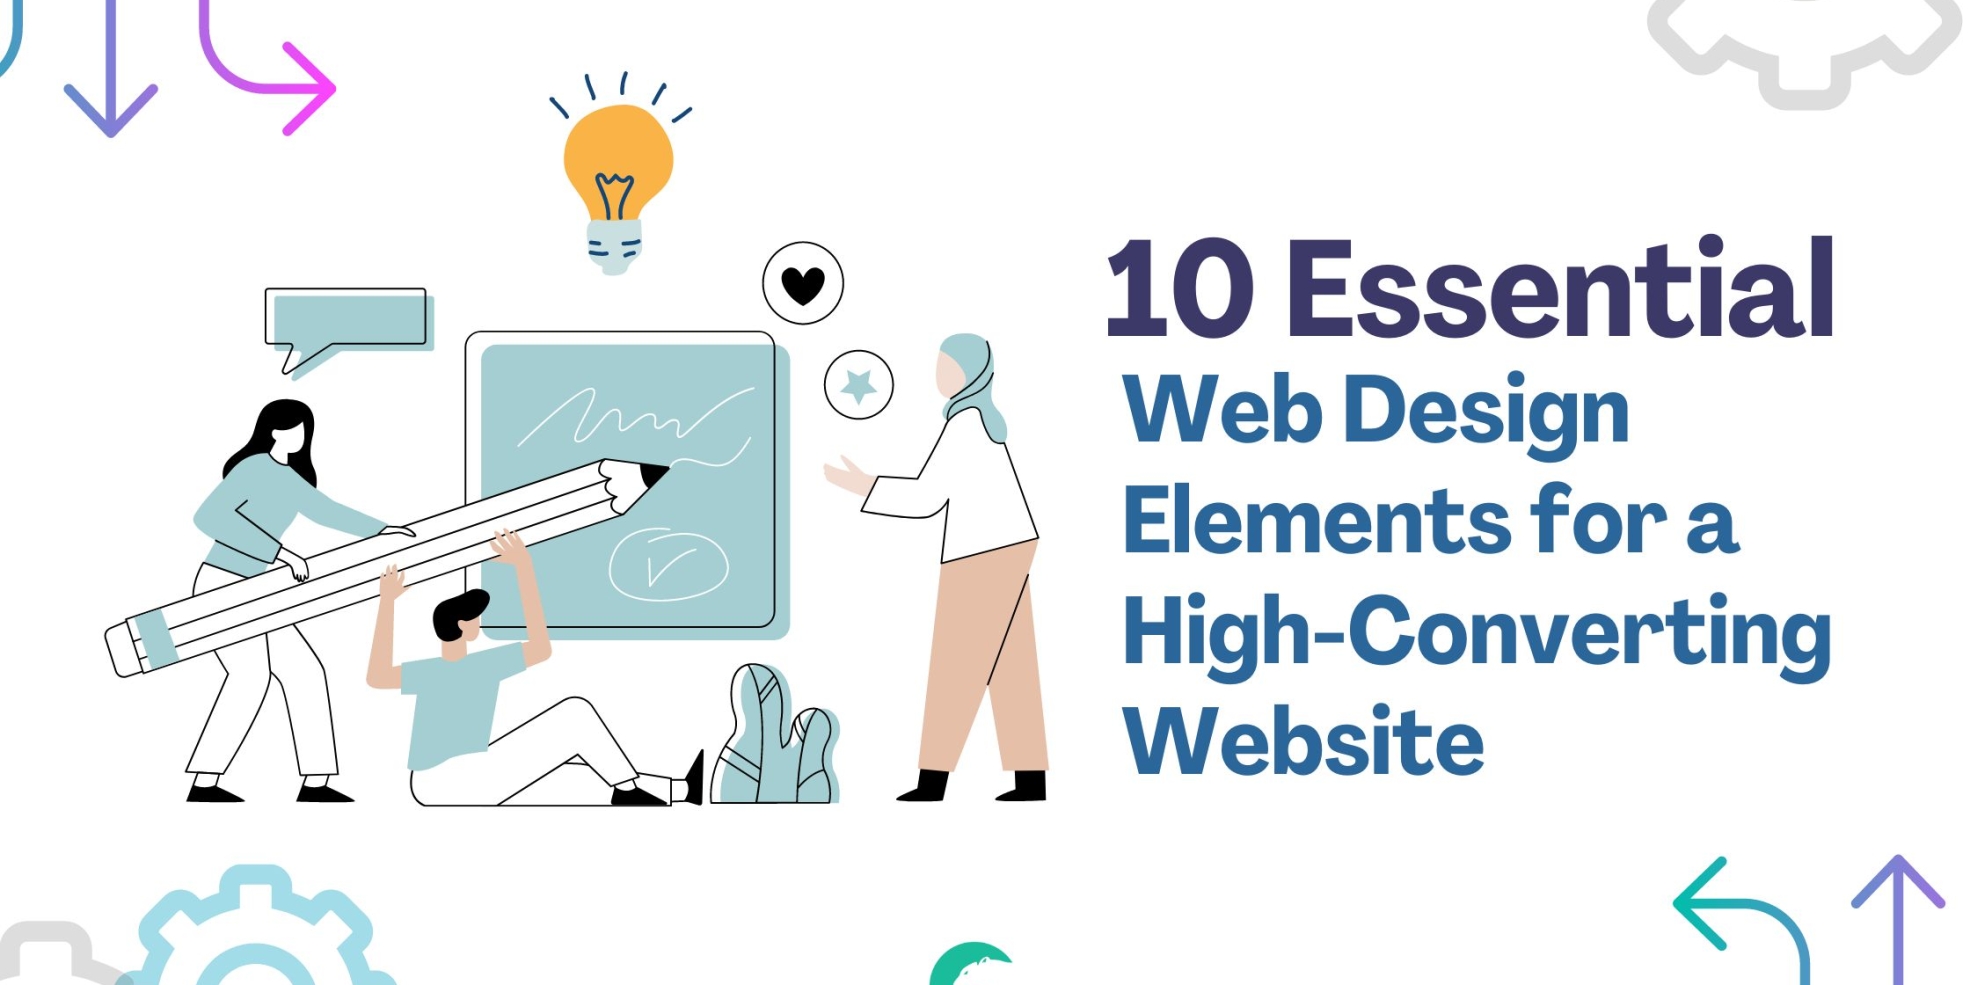 Web Design Elements for a High-Converting Website